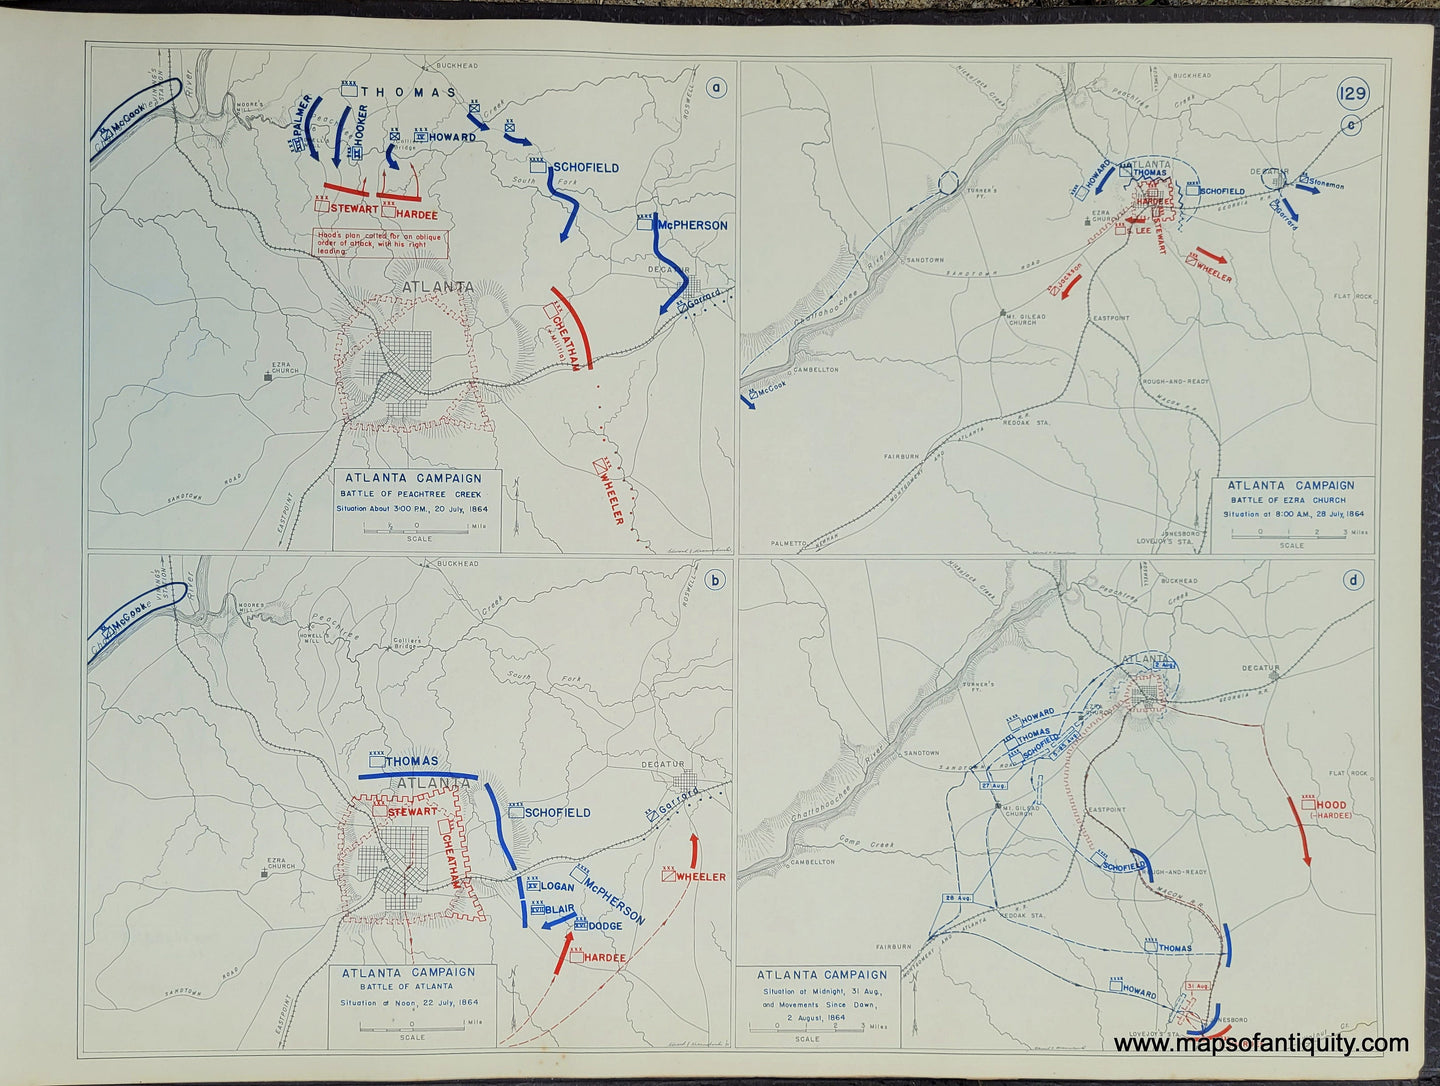 Genuine-Antique-Map-Atlanta-Campaign-Battles-of-Peachtree-Creek-Ezra-Church-Atlanta-and-Sutuation-at-Midnight-31-Aug--and-Movements-Since-Dawn-2-August-1864-1948-Matthew-Forney-Steele-Dept-of-Military-Art-and-Engineering-US-Military-Academy-West-Point-Maps-Of-Antiquity